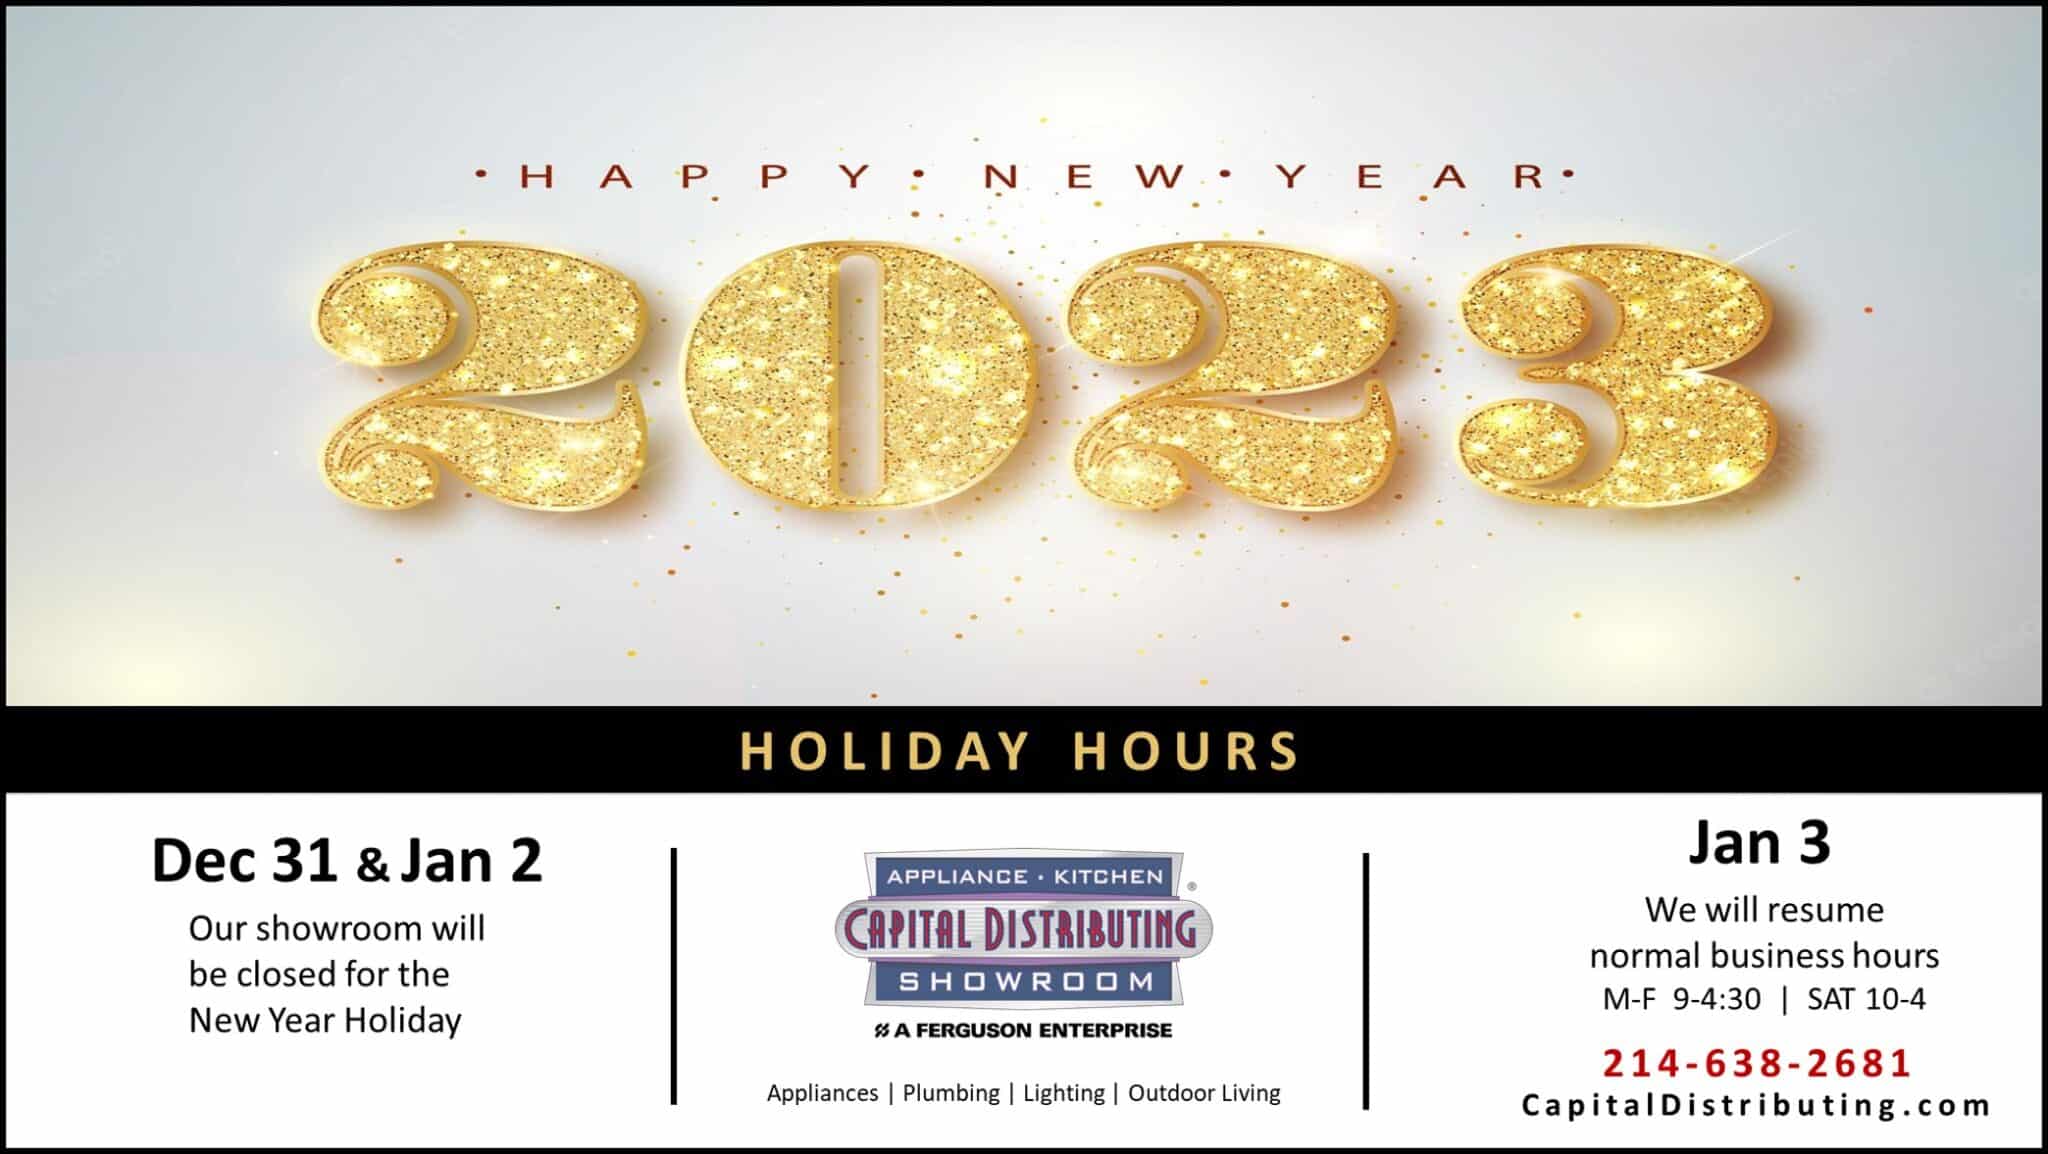 New Year Holiday Hours | Capital Distributing Appliances